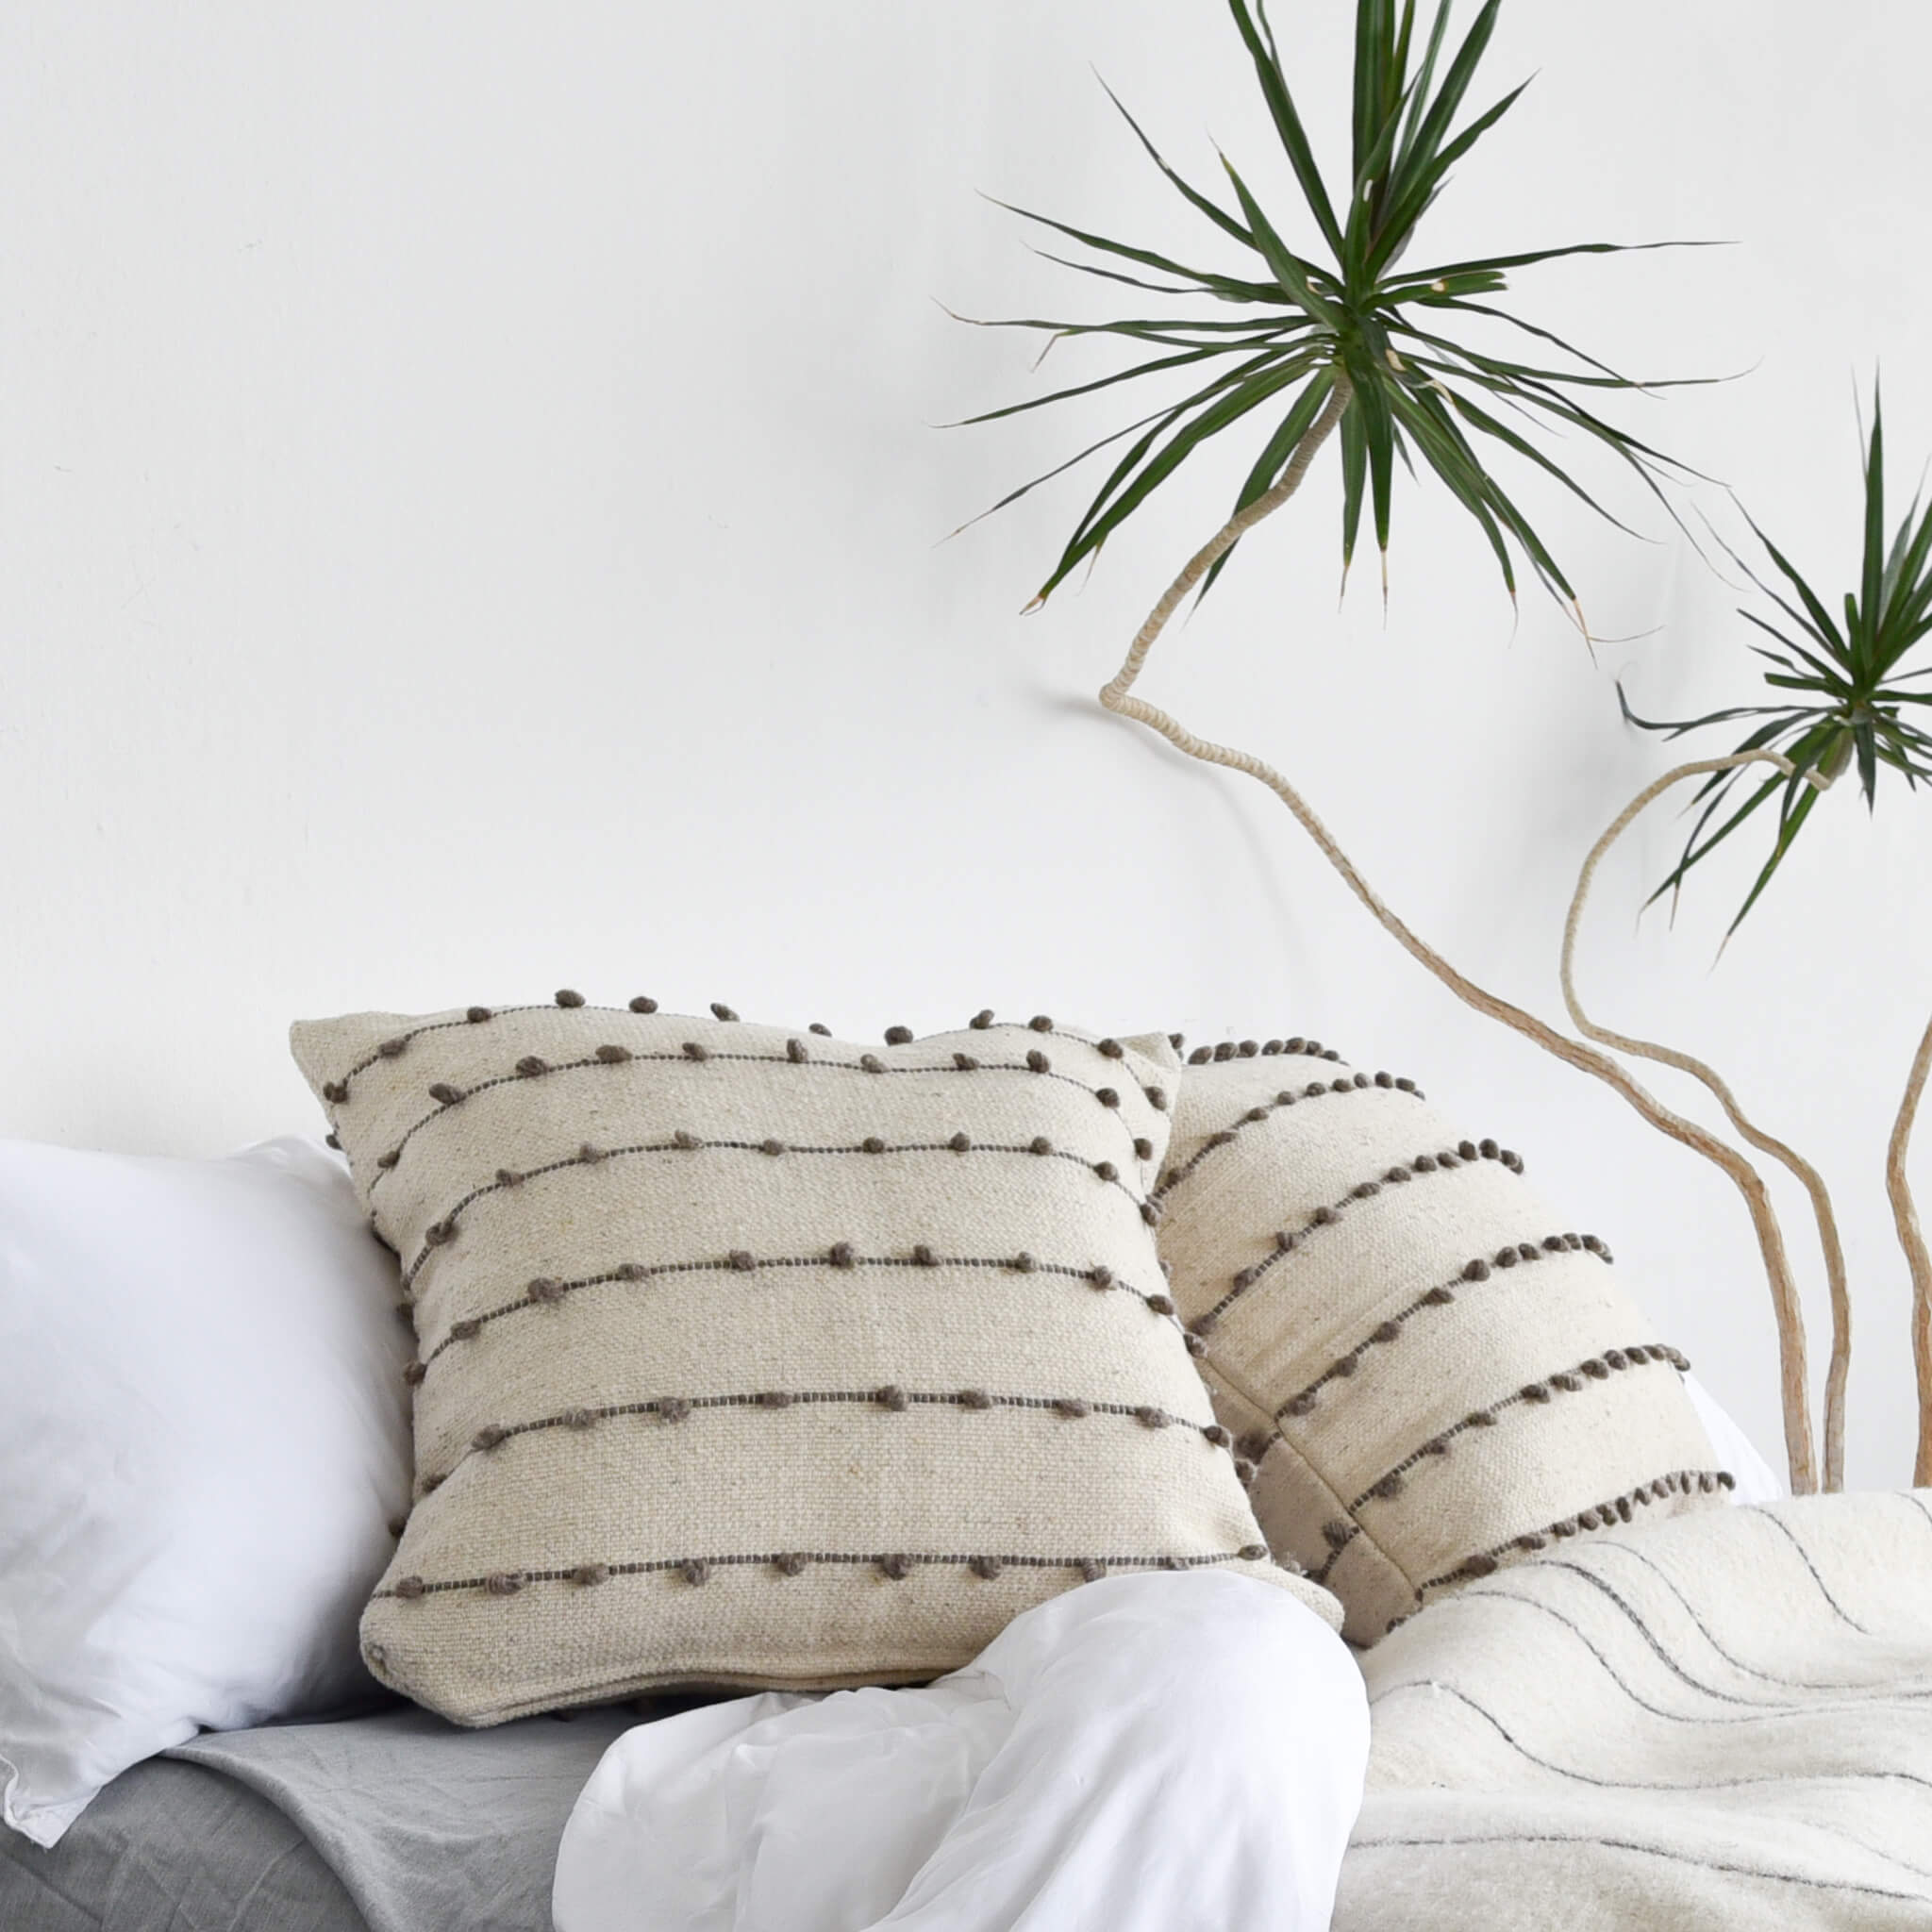 La Borla wool throw pillows with gray stitching on a white bed next to a sculptural yucca plant.